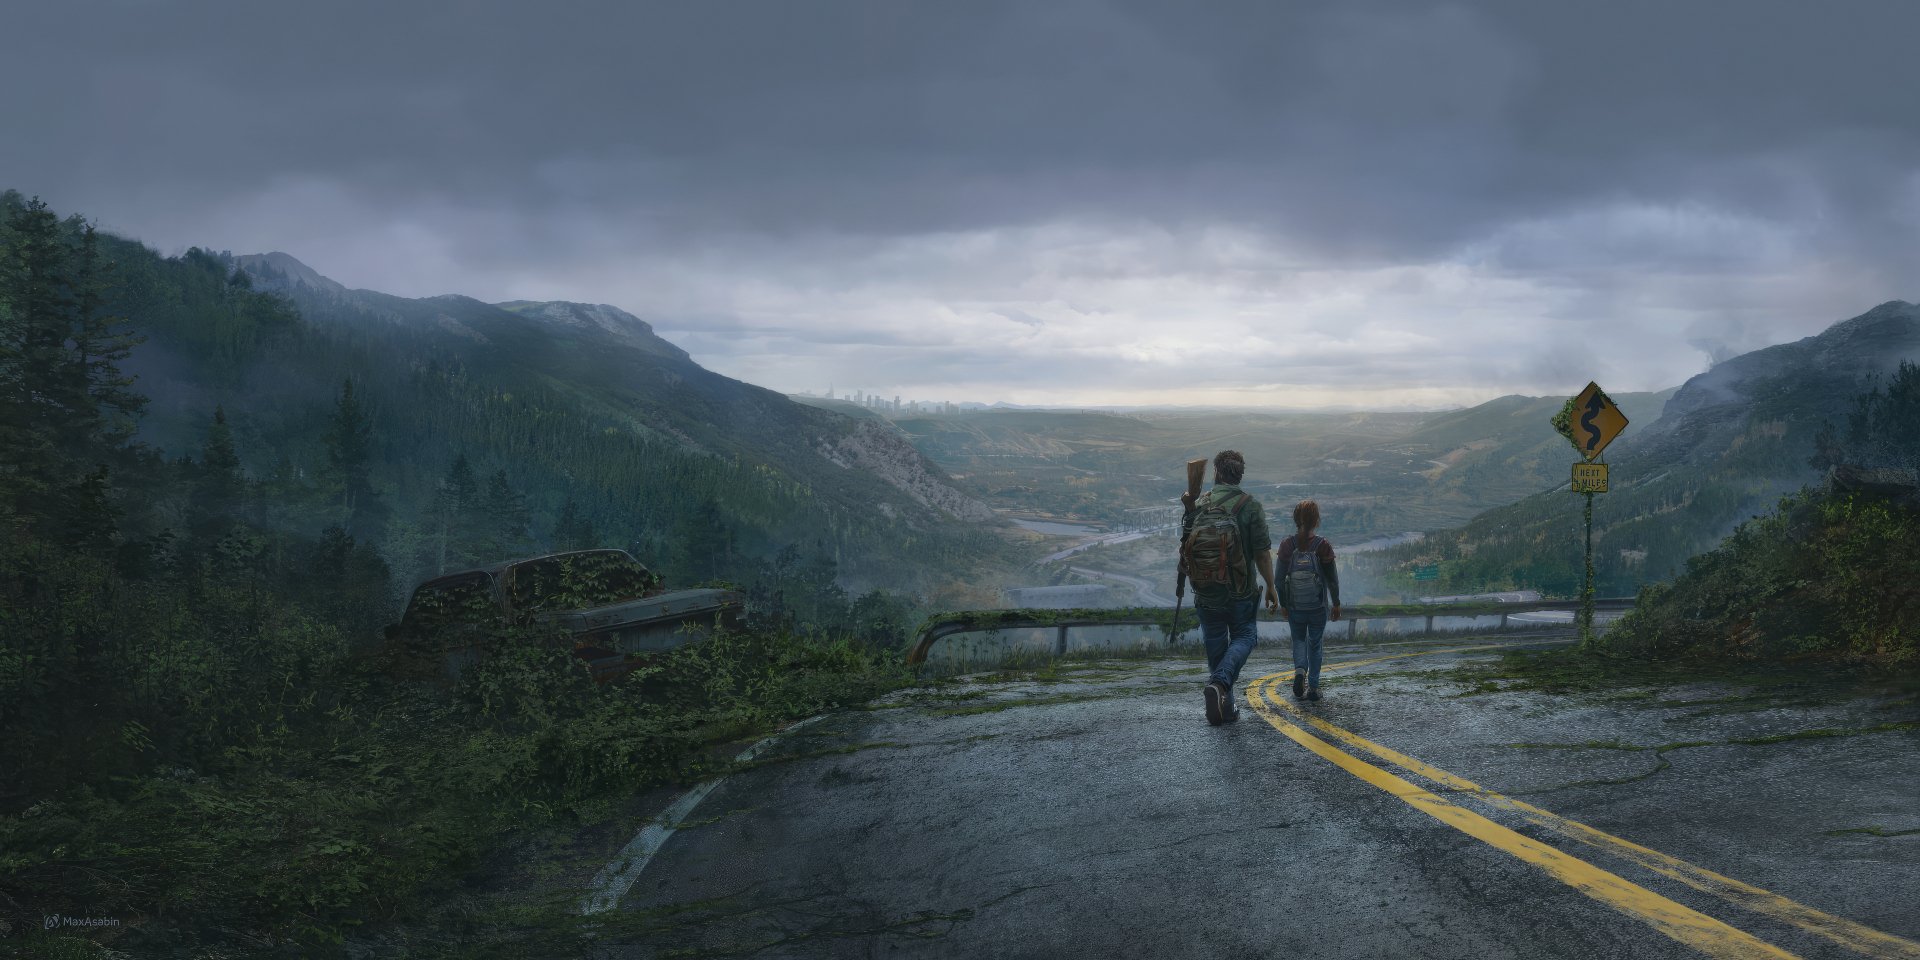 Download The Last Of Us Part Ii wallpapers for mobile phone